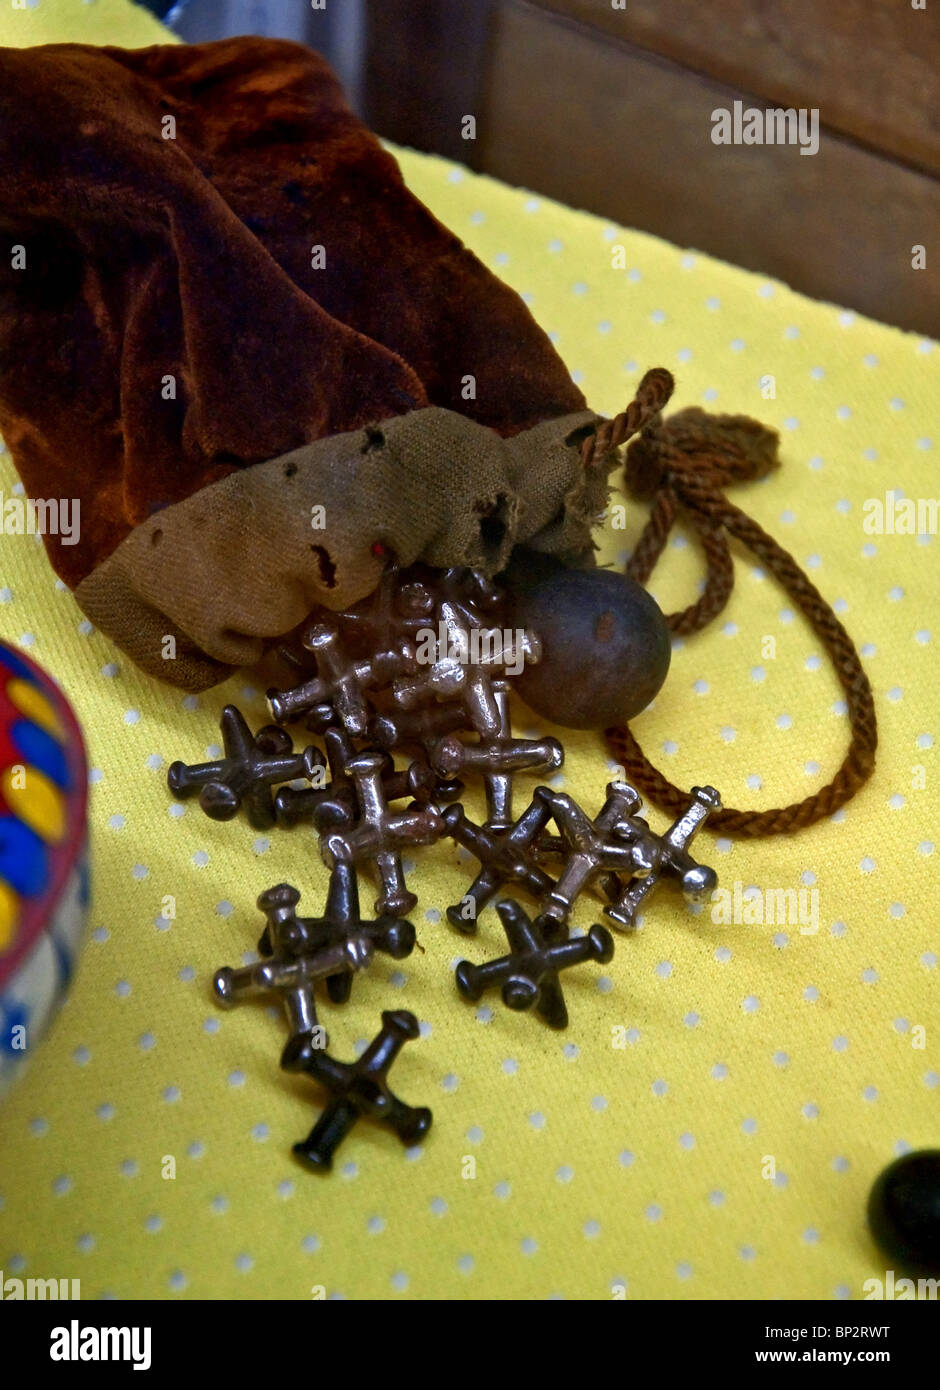 Antique items, a brown draw string pouch with a ball and jacks poured out as the central object. Stock Photo